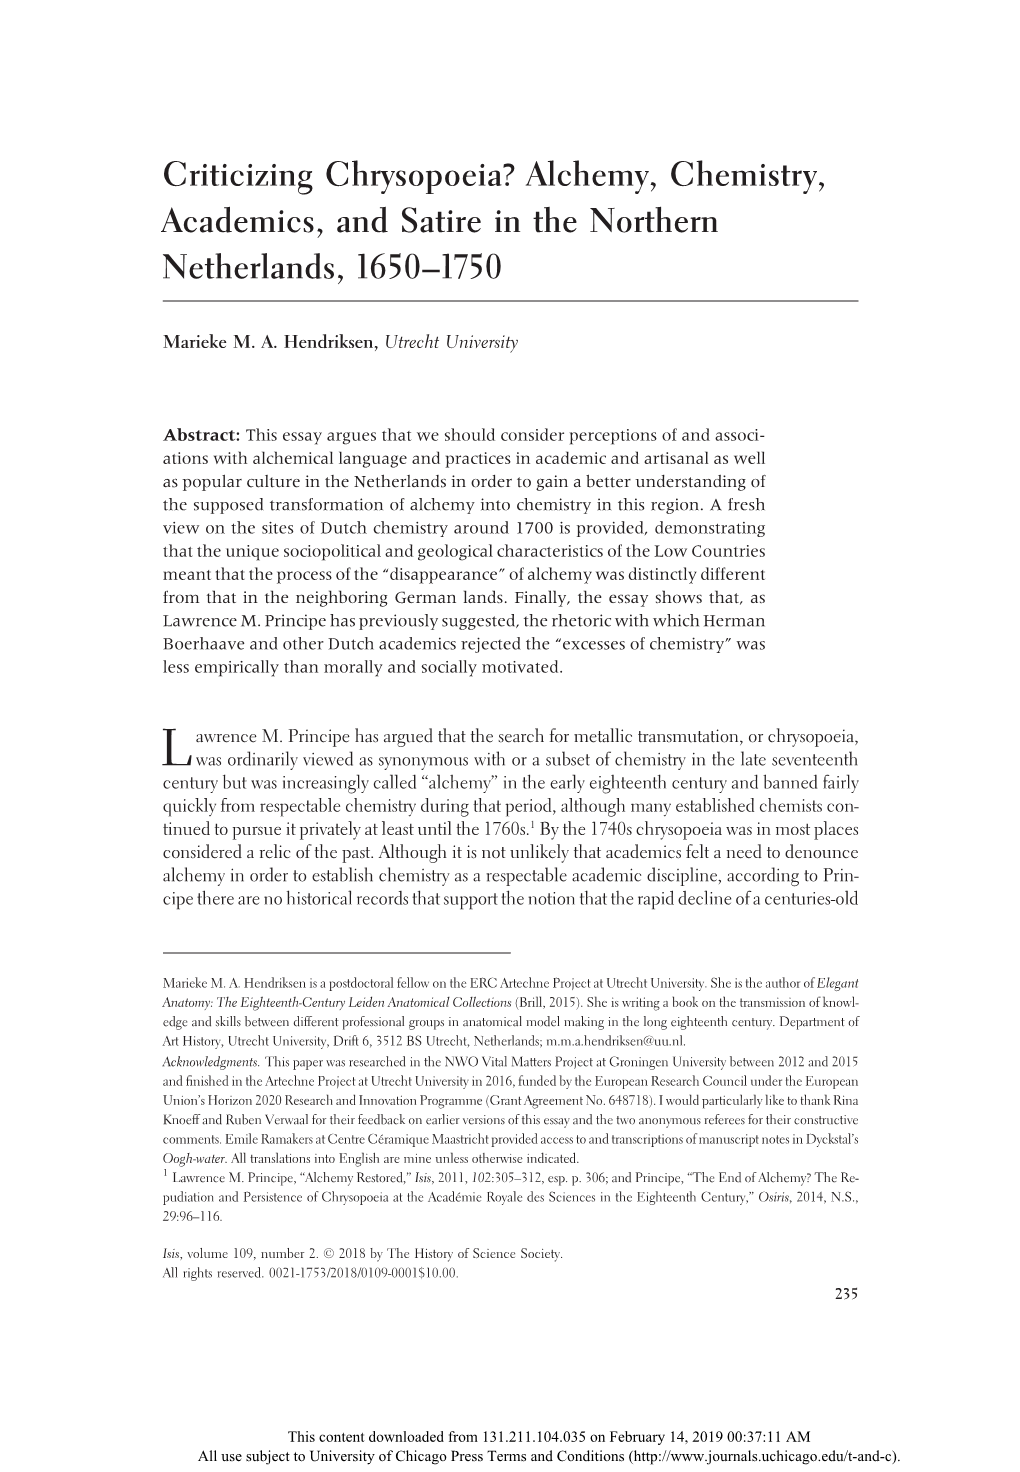 Criticizing Chrysopoeia? Alchemy, Chemistry, Academics, and Satire in the Northern Netherlands, 1650–1750